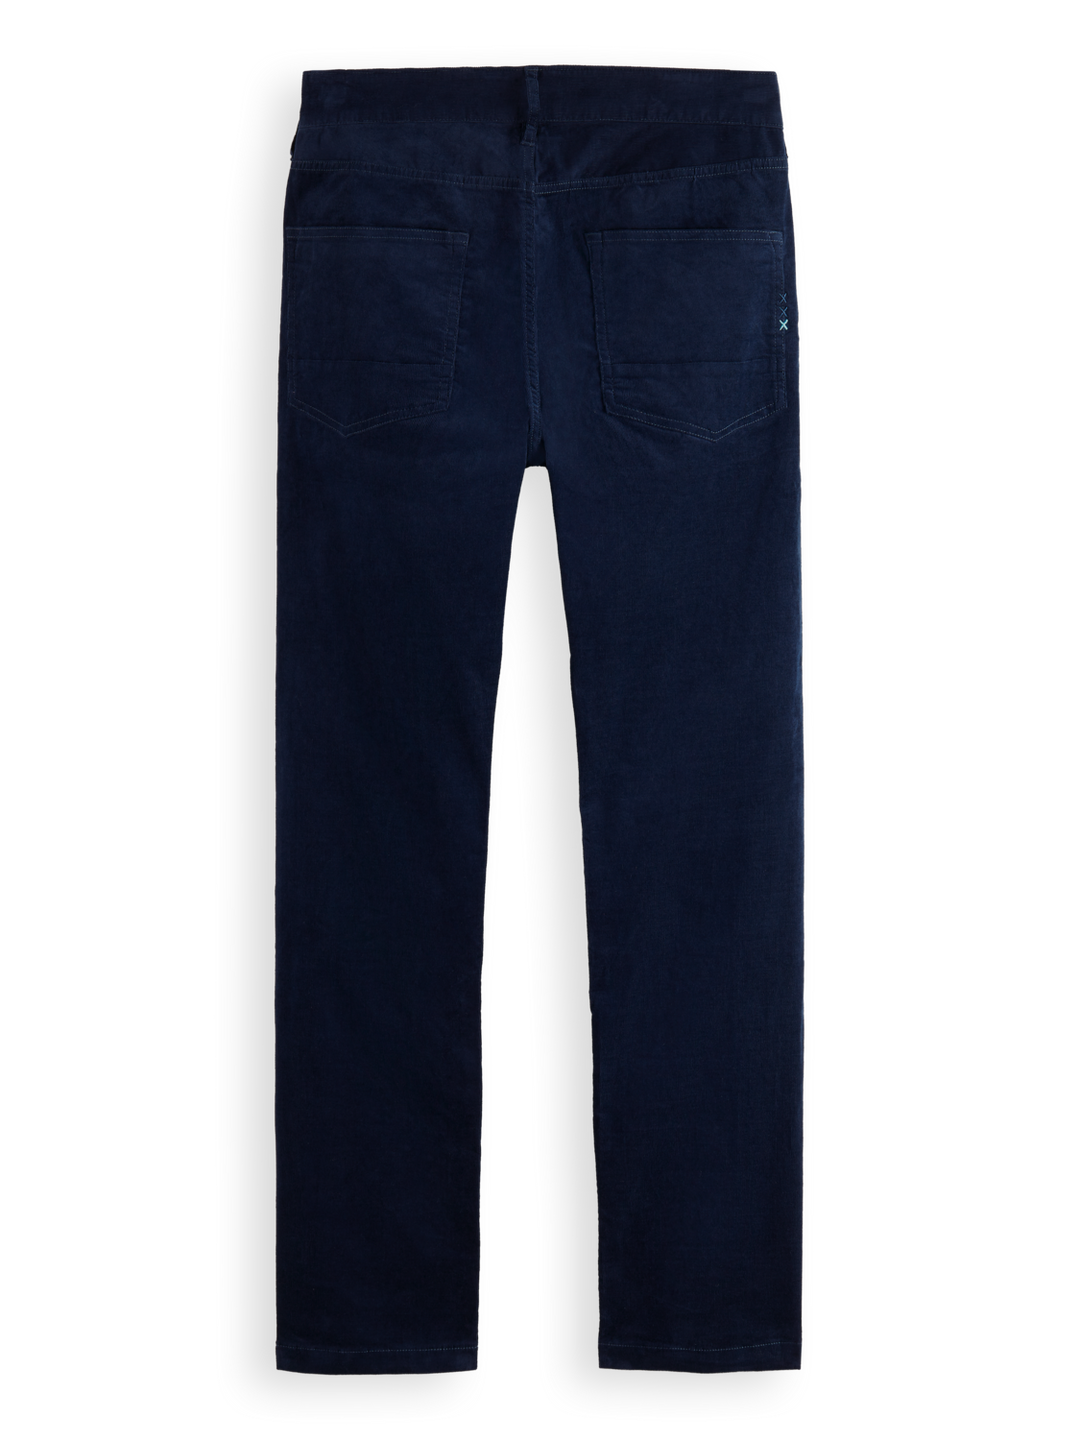 Ralston 5 Pocket Fine Corduroy Pant in Steel | Buster McGee